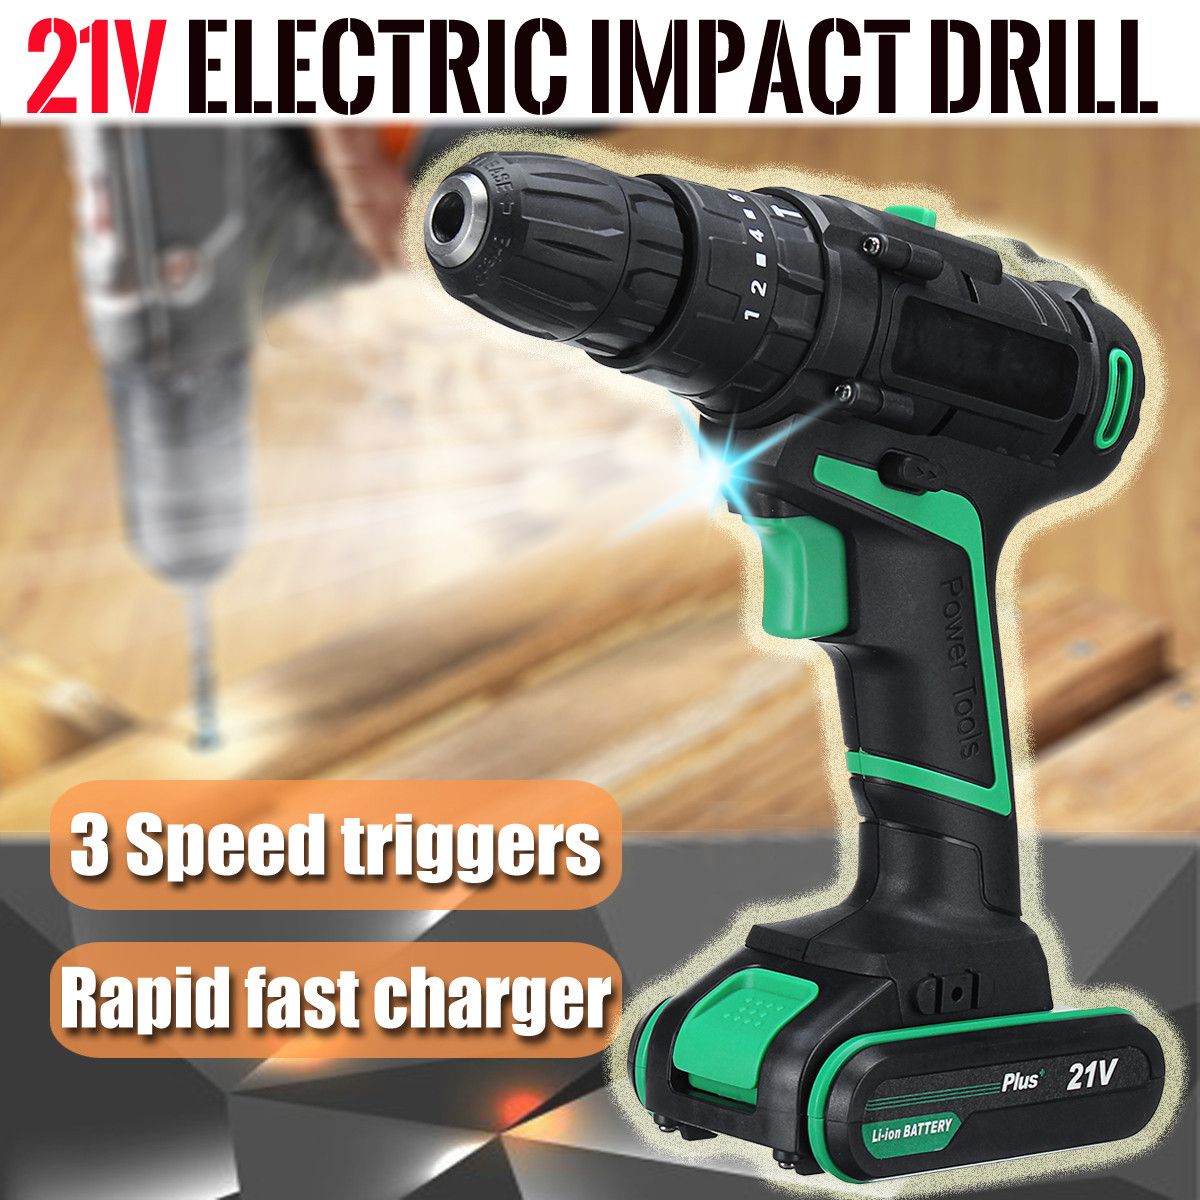 21V-Multi-function-Electric-Screwdriver-Rechargeable-Cordless-Power-Drilling-Tools-Power-Drills-1376917